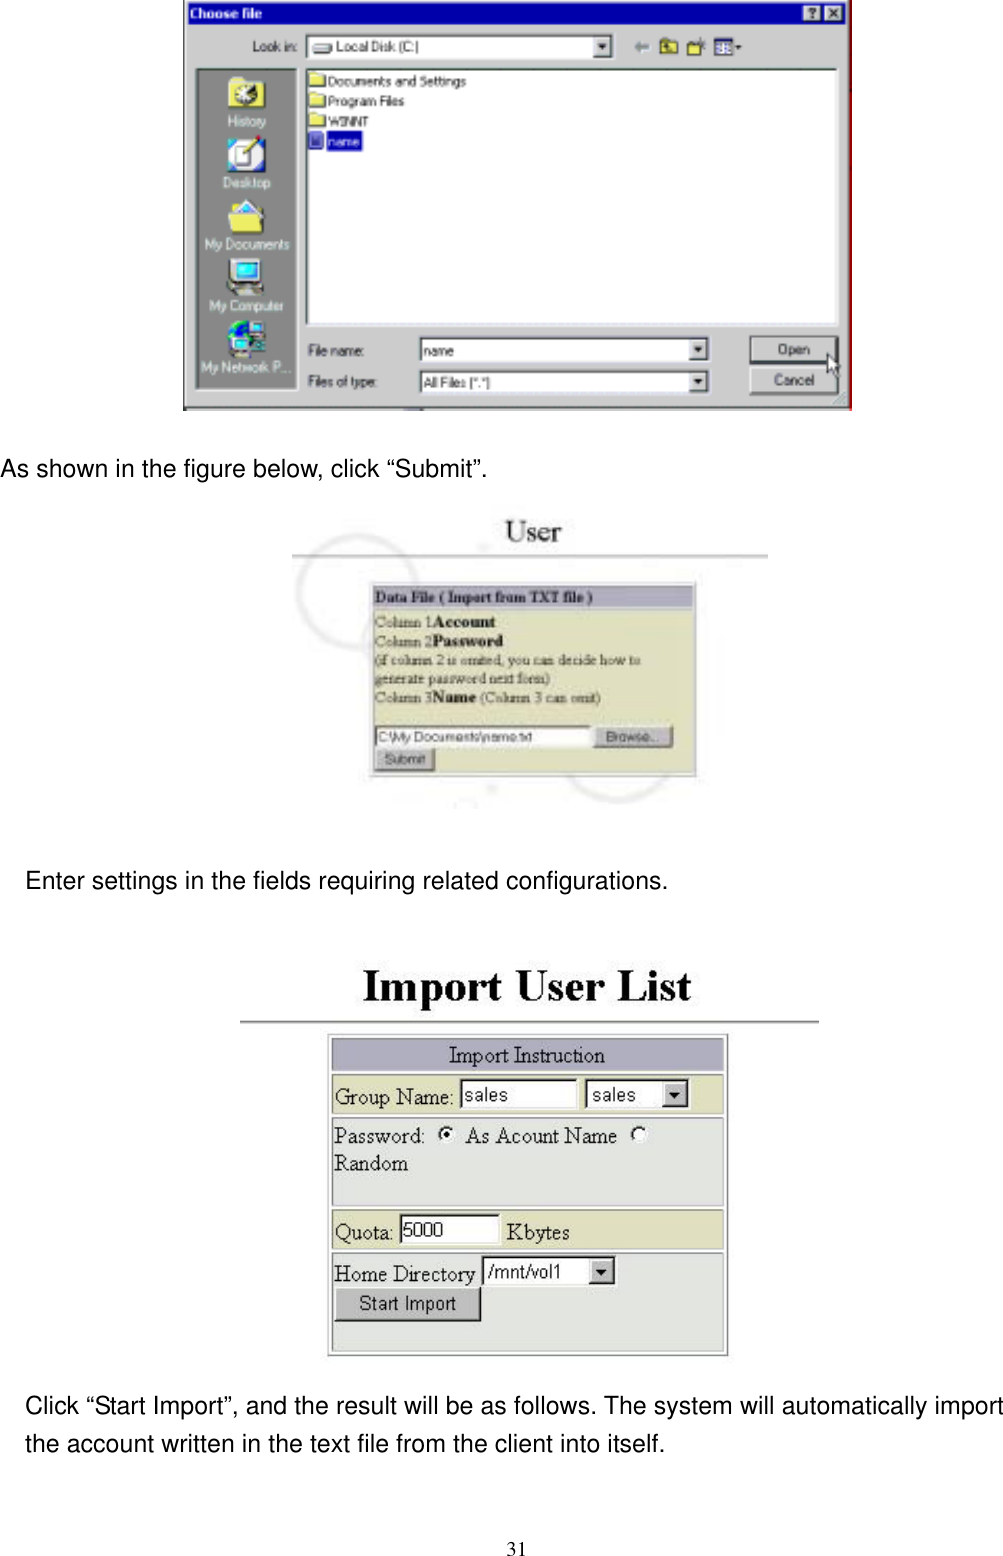  31  As shown in the figure below, click “Submit”.   Enter settings in the fields requiring related configurations.     Click “Start Import”, and the result will be as follows. The system will automatically import the account written in the text file from the client into itself.    